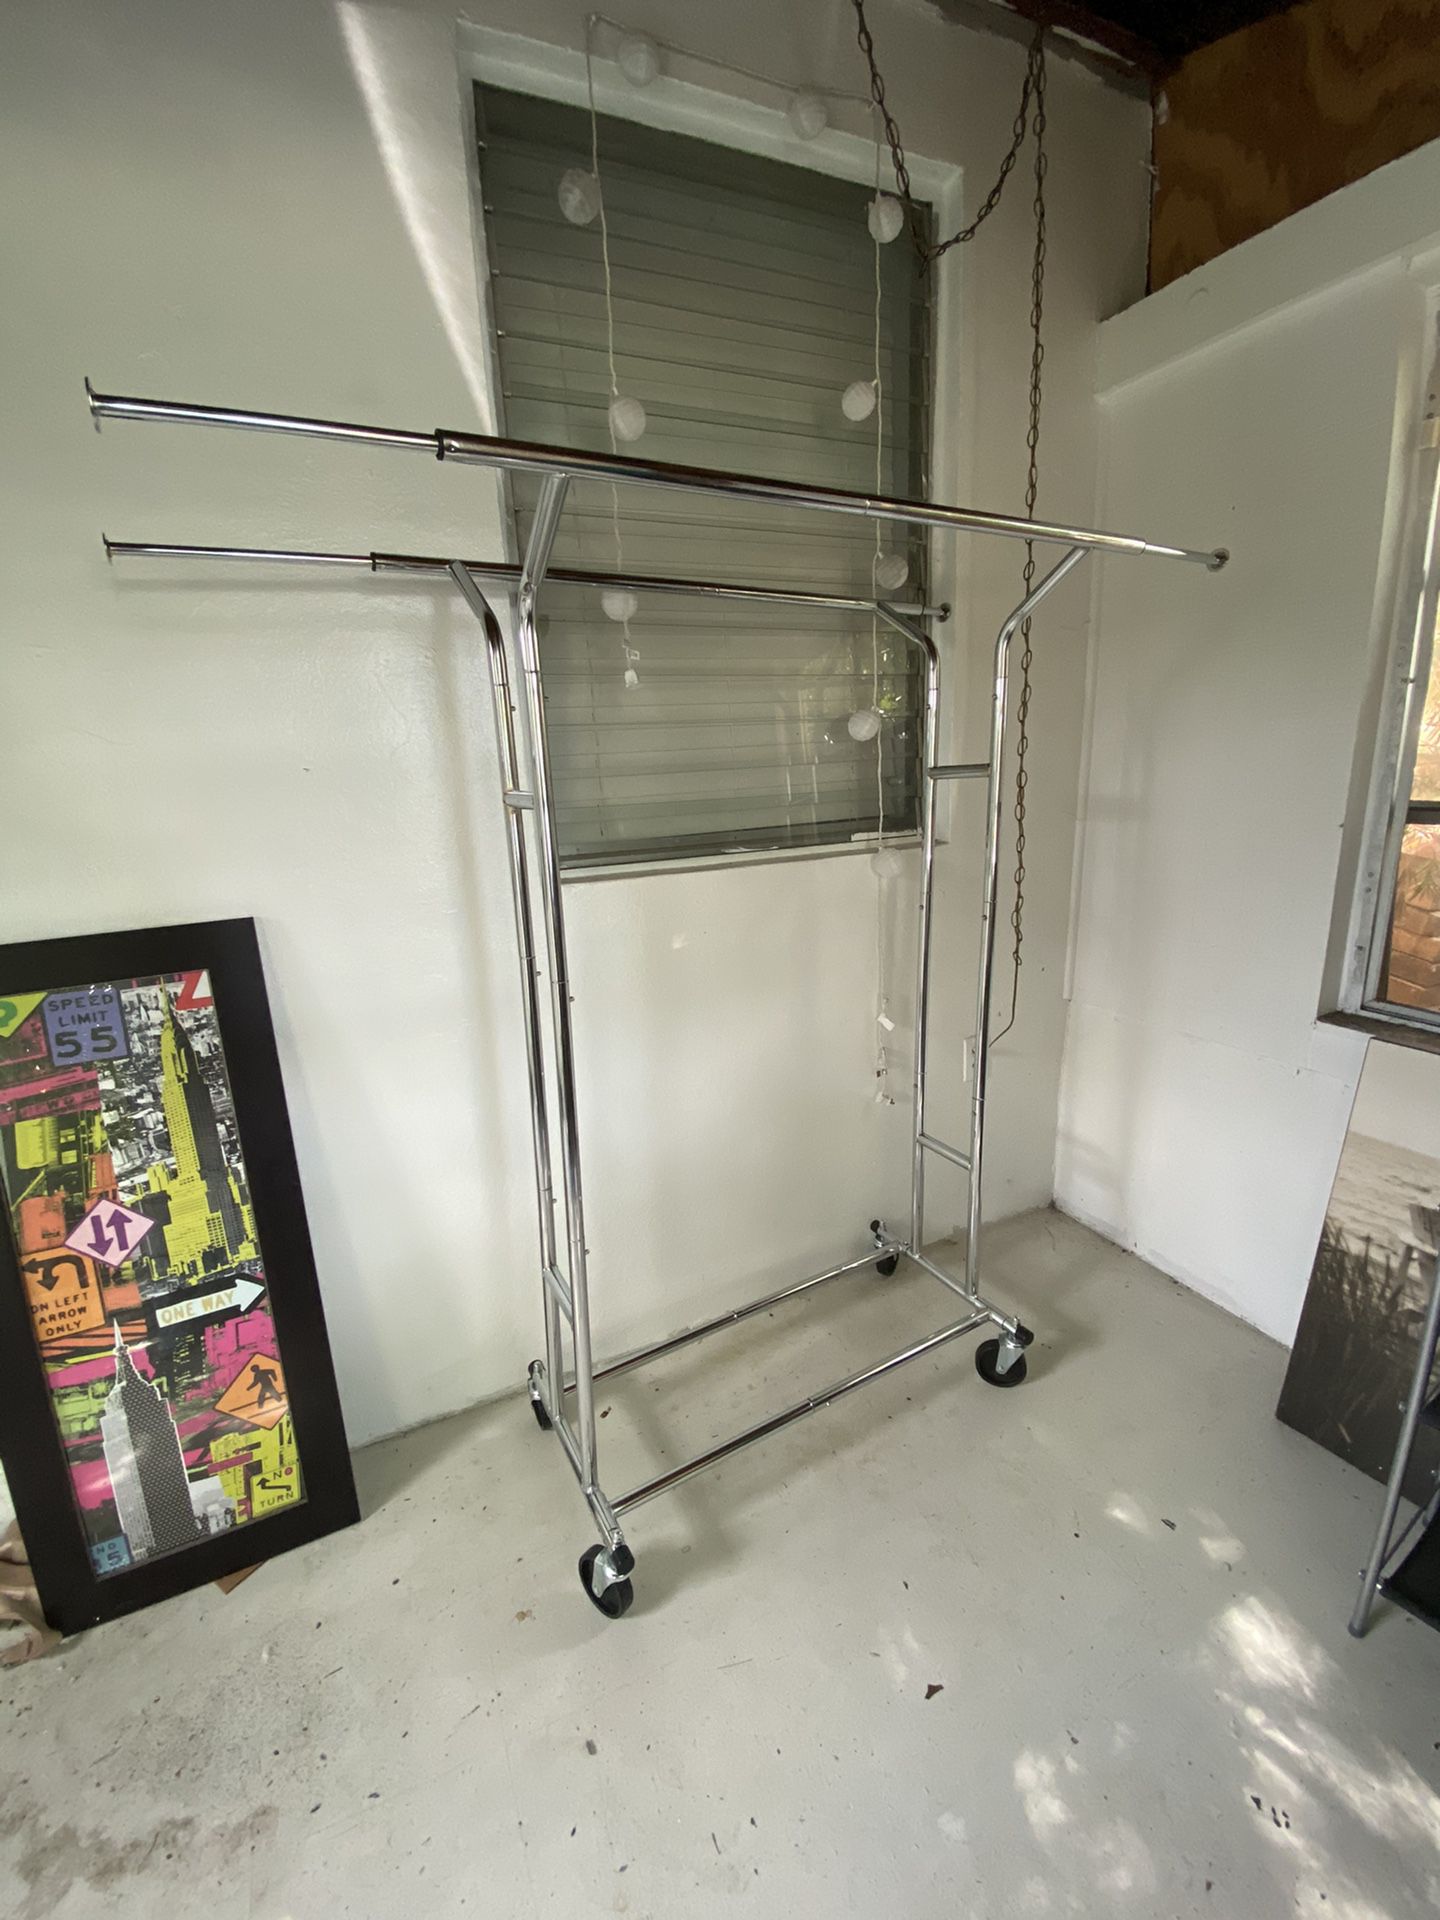 Clothing rack holds up to 150lbs